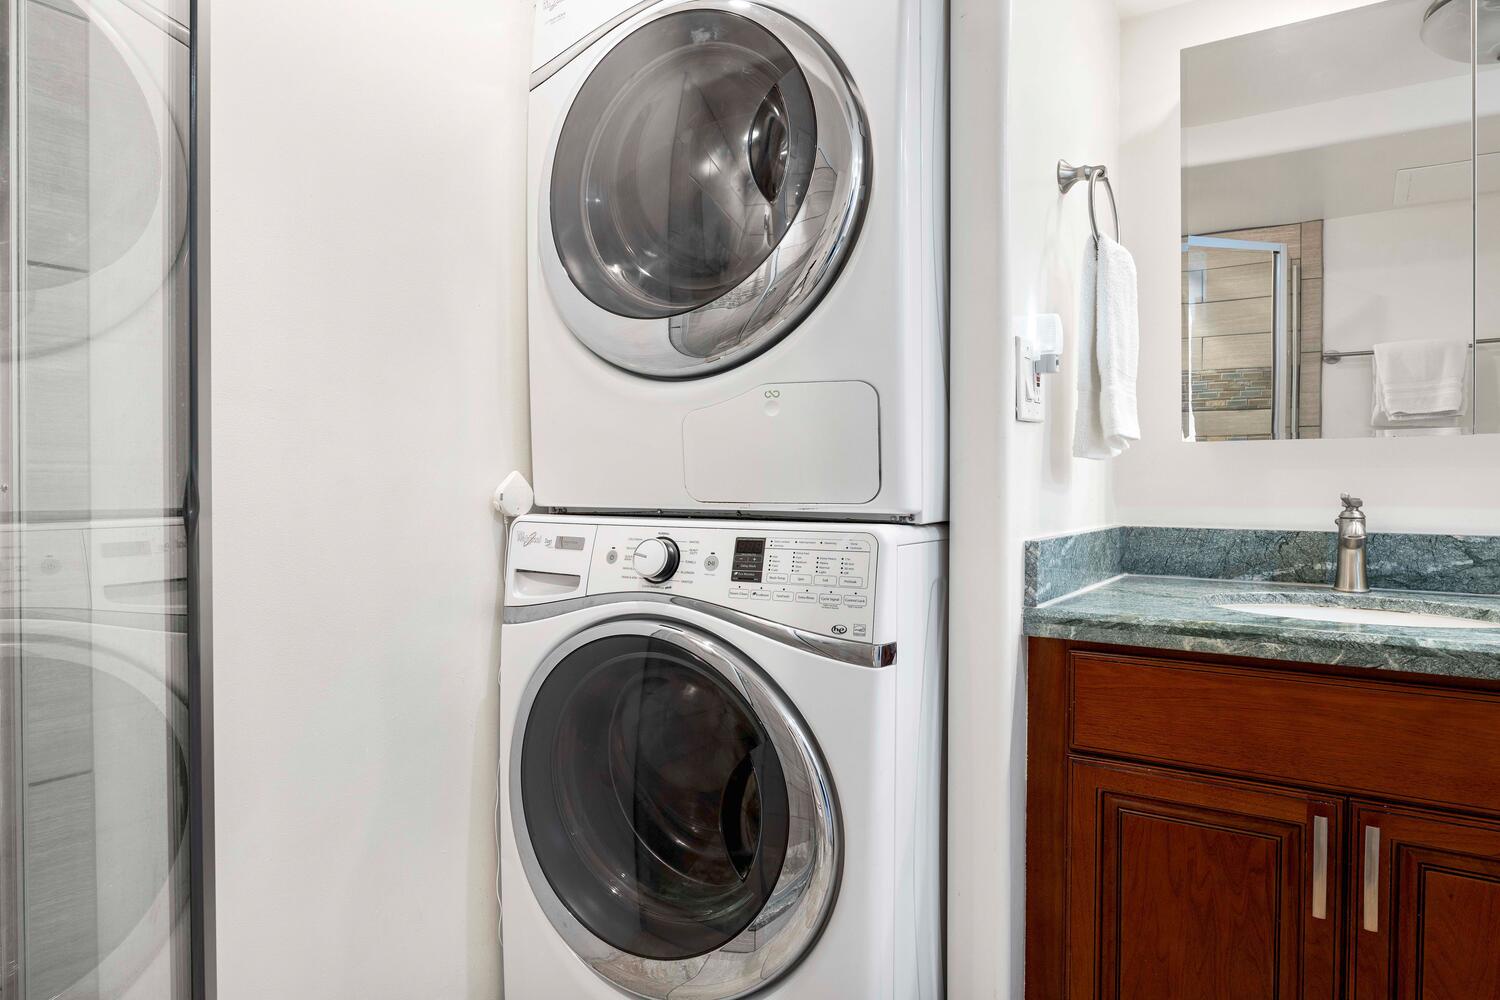 Kailua Kona Vacation Rentals, Kona Alii 403 - An in-unit washer and dryer for your convenience.